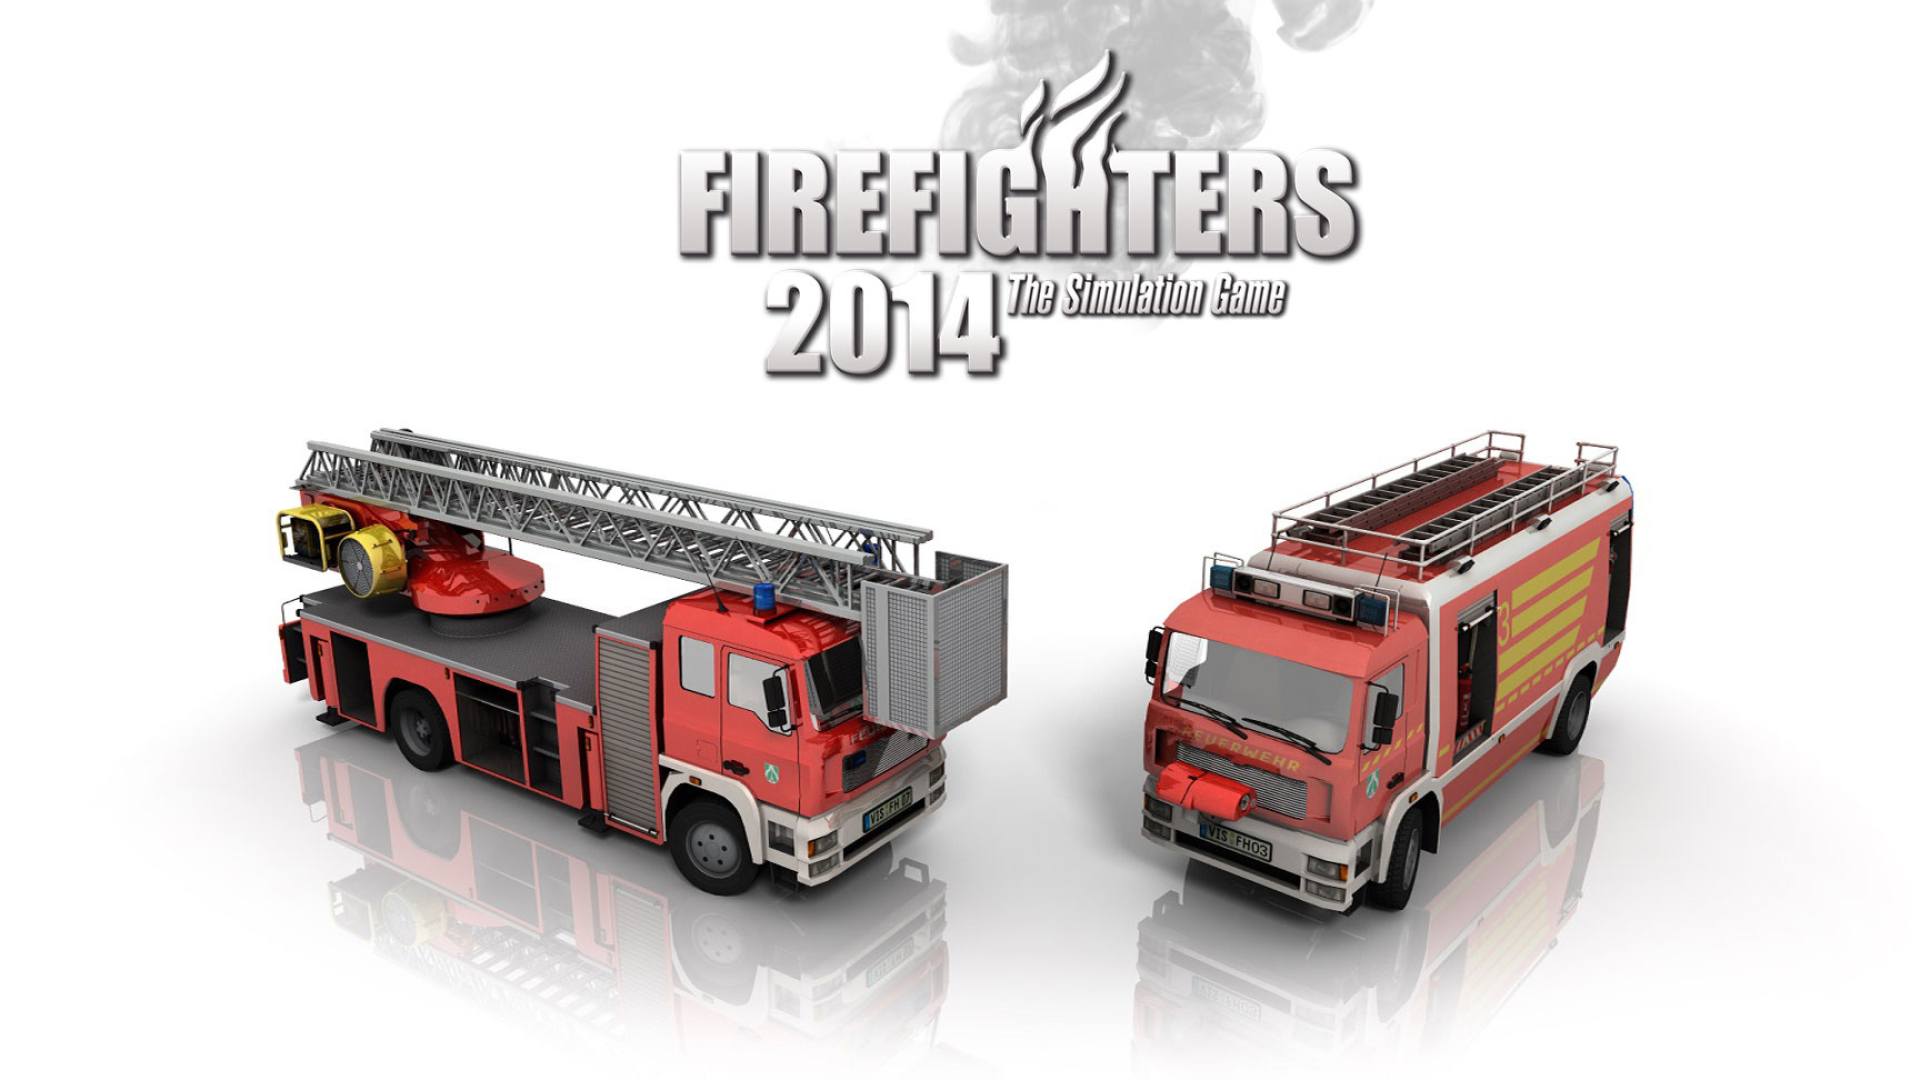 Simulation Game, firefighters 2014, game game wallpapers, riot pixels, 1920x1080 Full HD Desktop